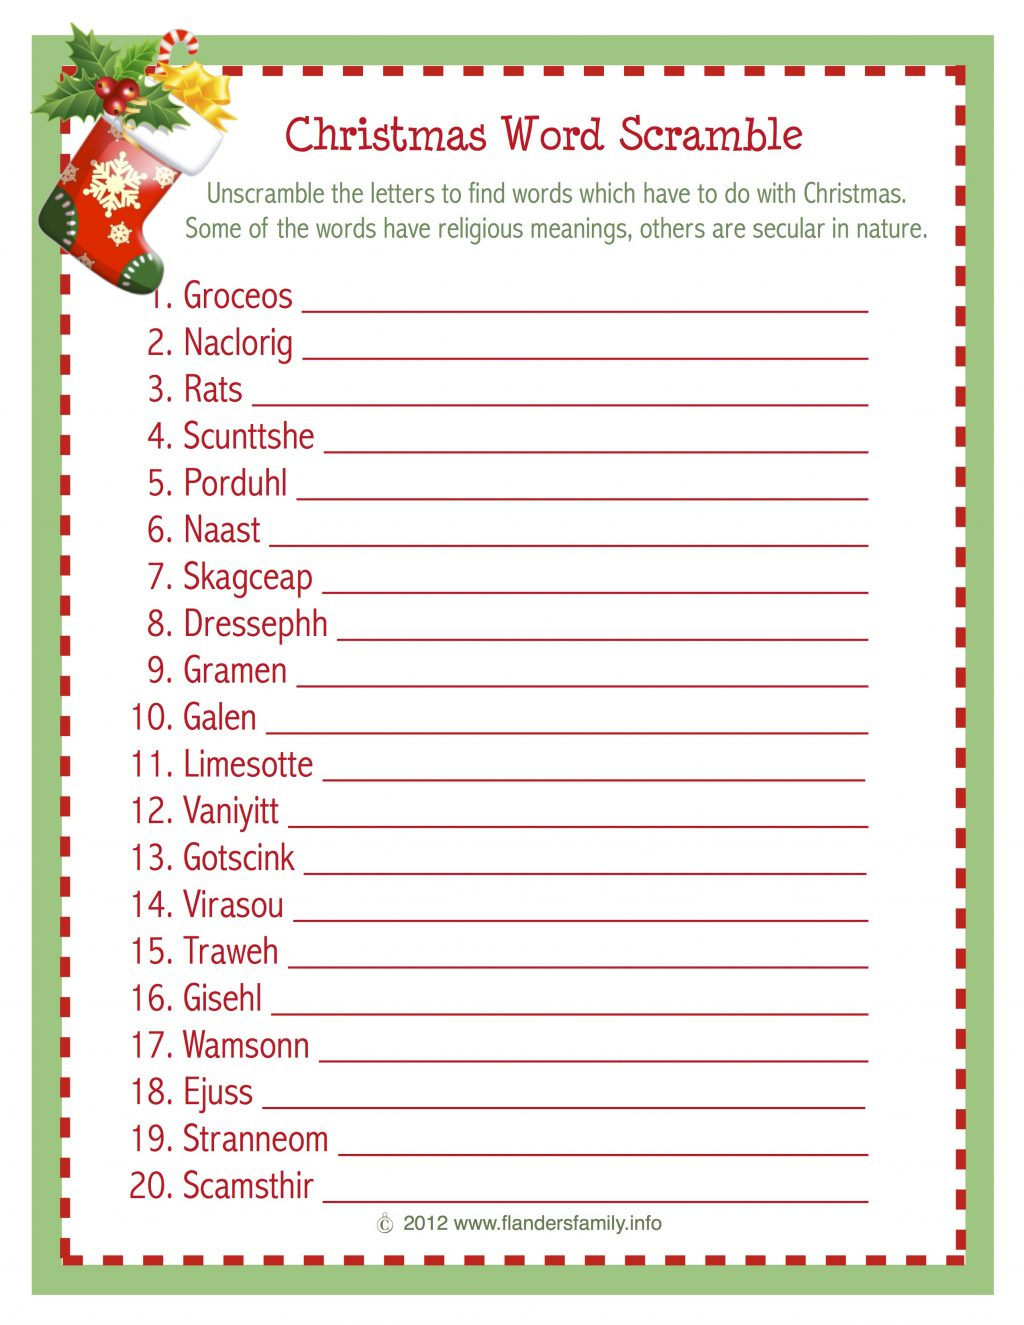 Christmas Word Scramble (Free Printable) - Flanders Family Homelife - Holiday Office Party Games Free Printable